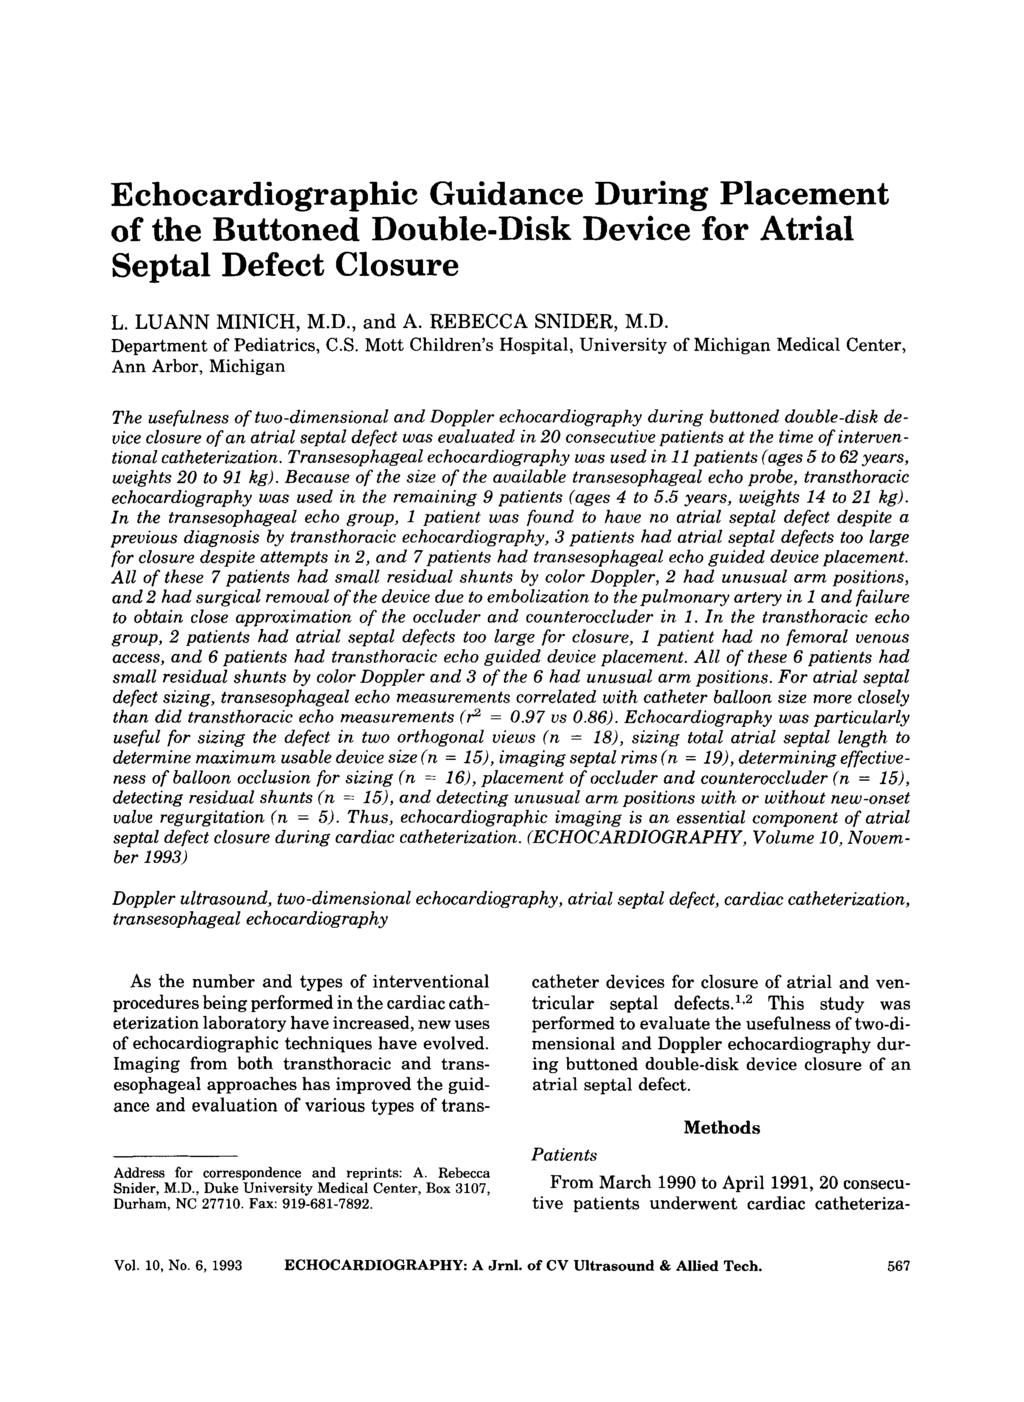 Echocardiographic Guidance During Placement of the Buttoned Double-Disk Device for Atrial Se